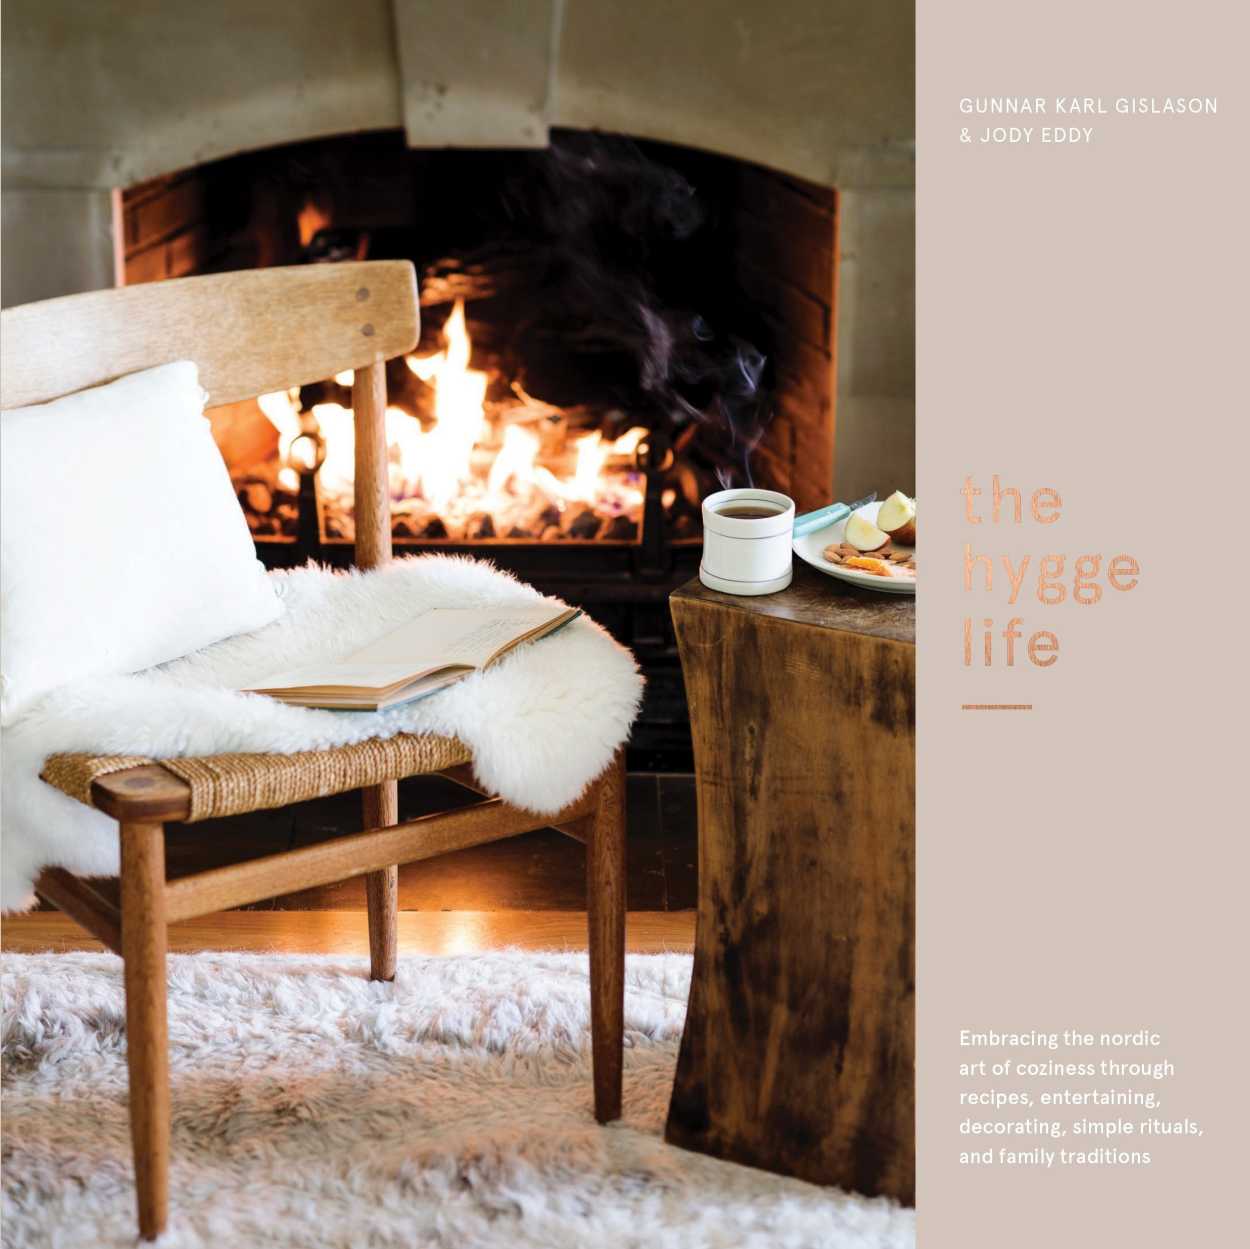 Cover for the book "The Hygge Life"